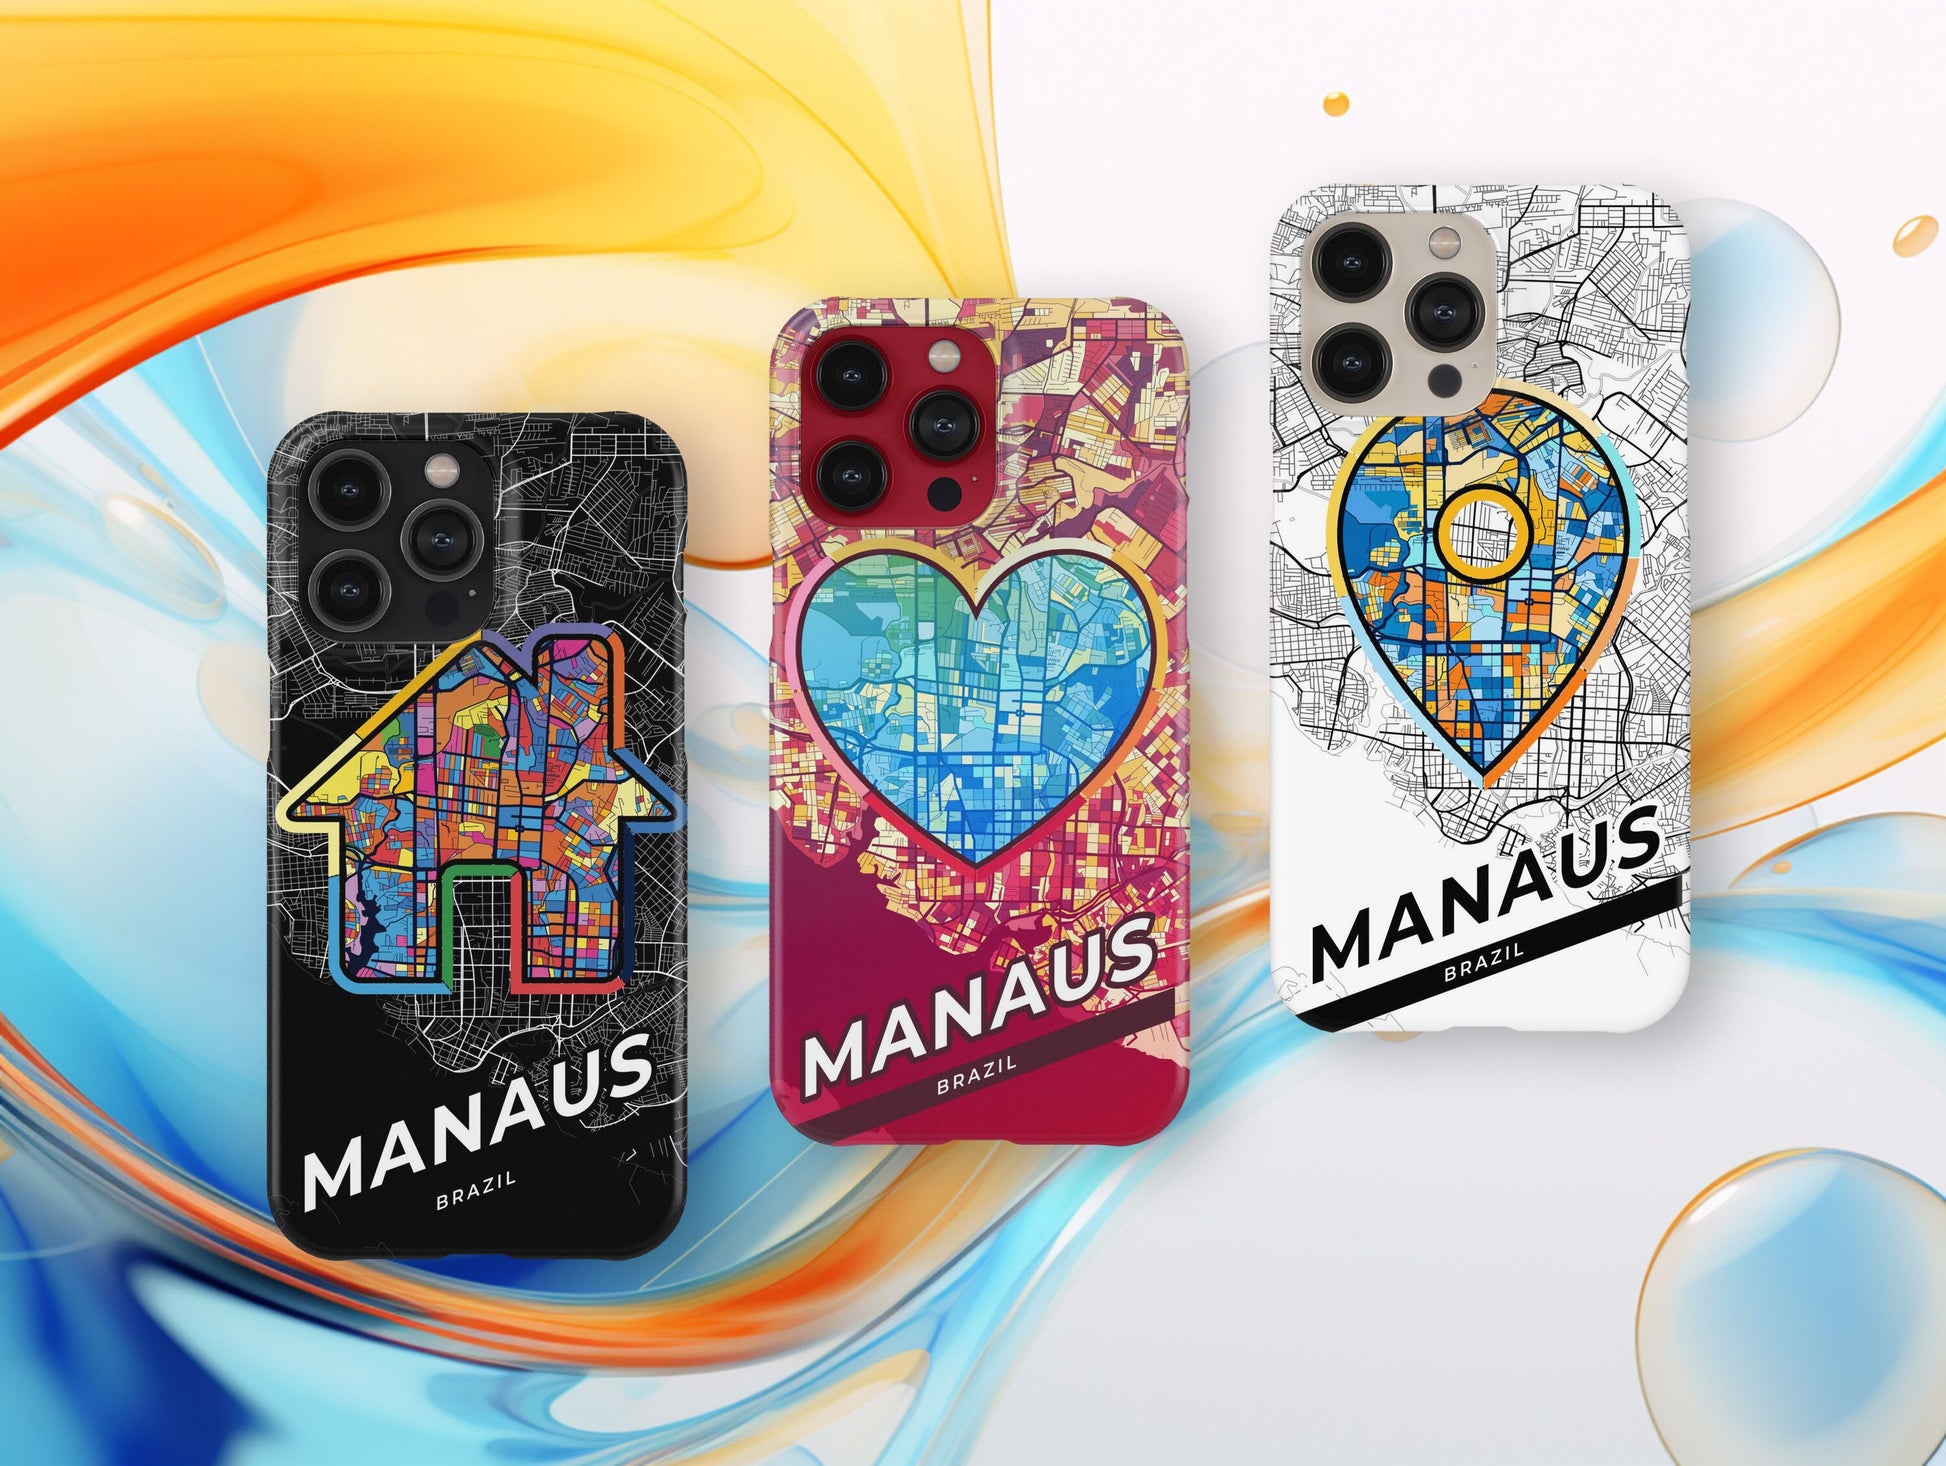 Manaus Brazil slim phone case with colorful icon. Birthday, wedding or housewarming gift. Couple match cases.